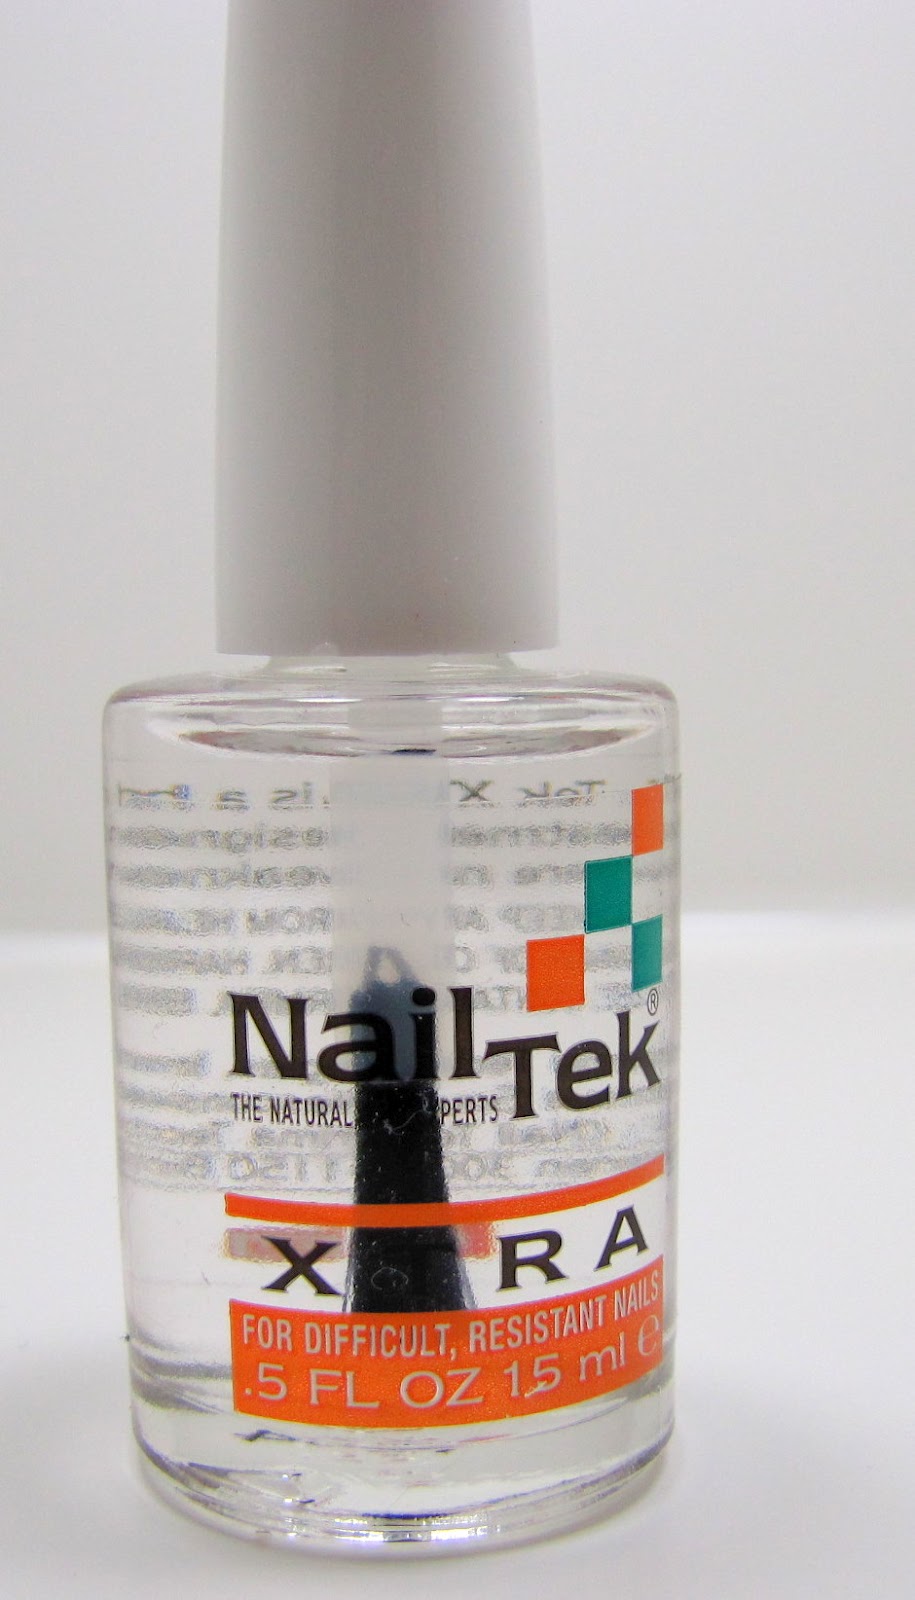 I decided to give Nail Tek Xtra a try and here are my results